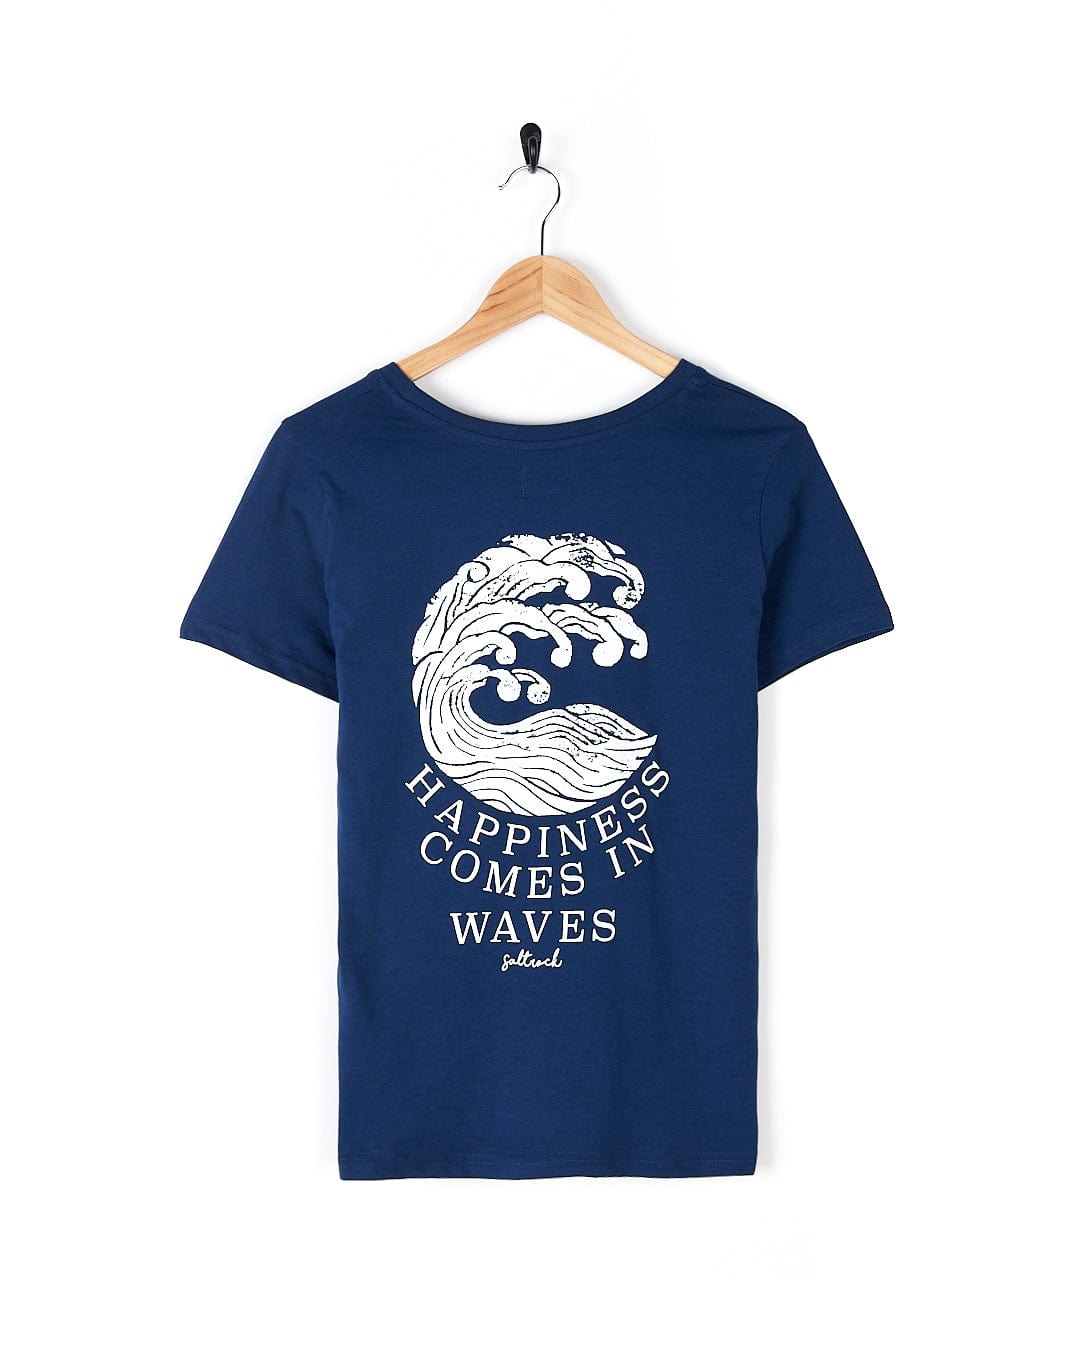 A Saltrock Happiness Velator - Womens T-Shirt - Navy that says happiness comes in waves.